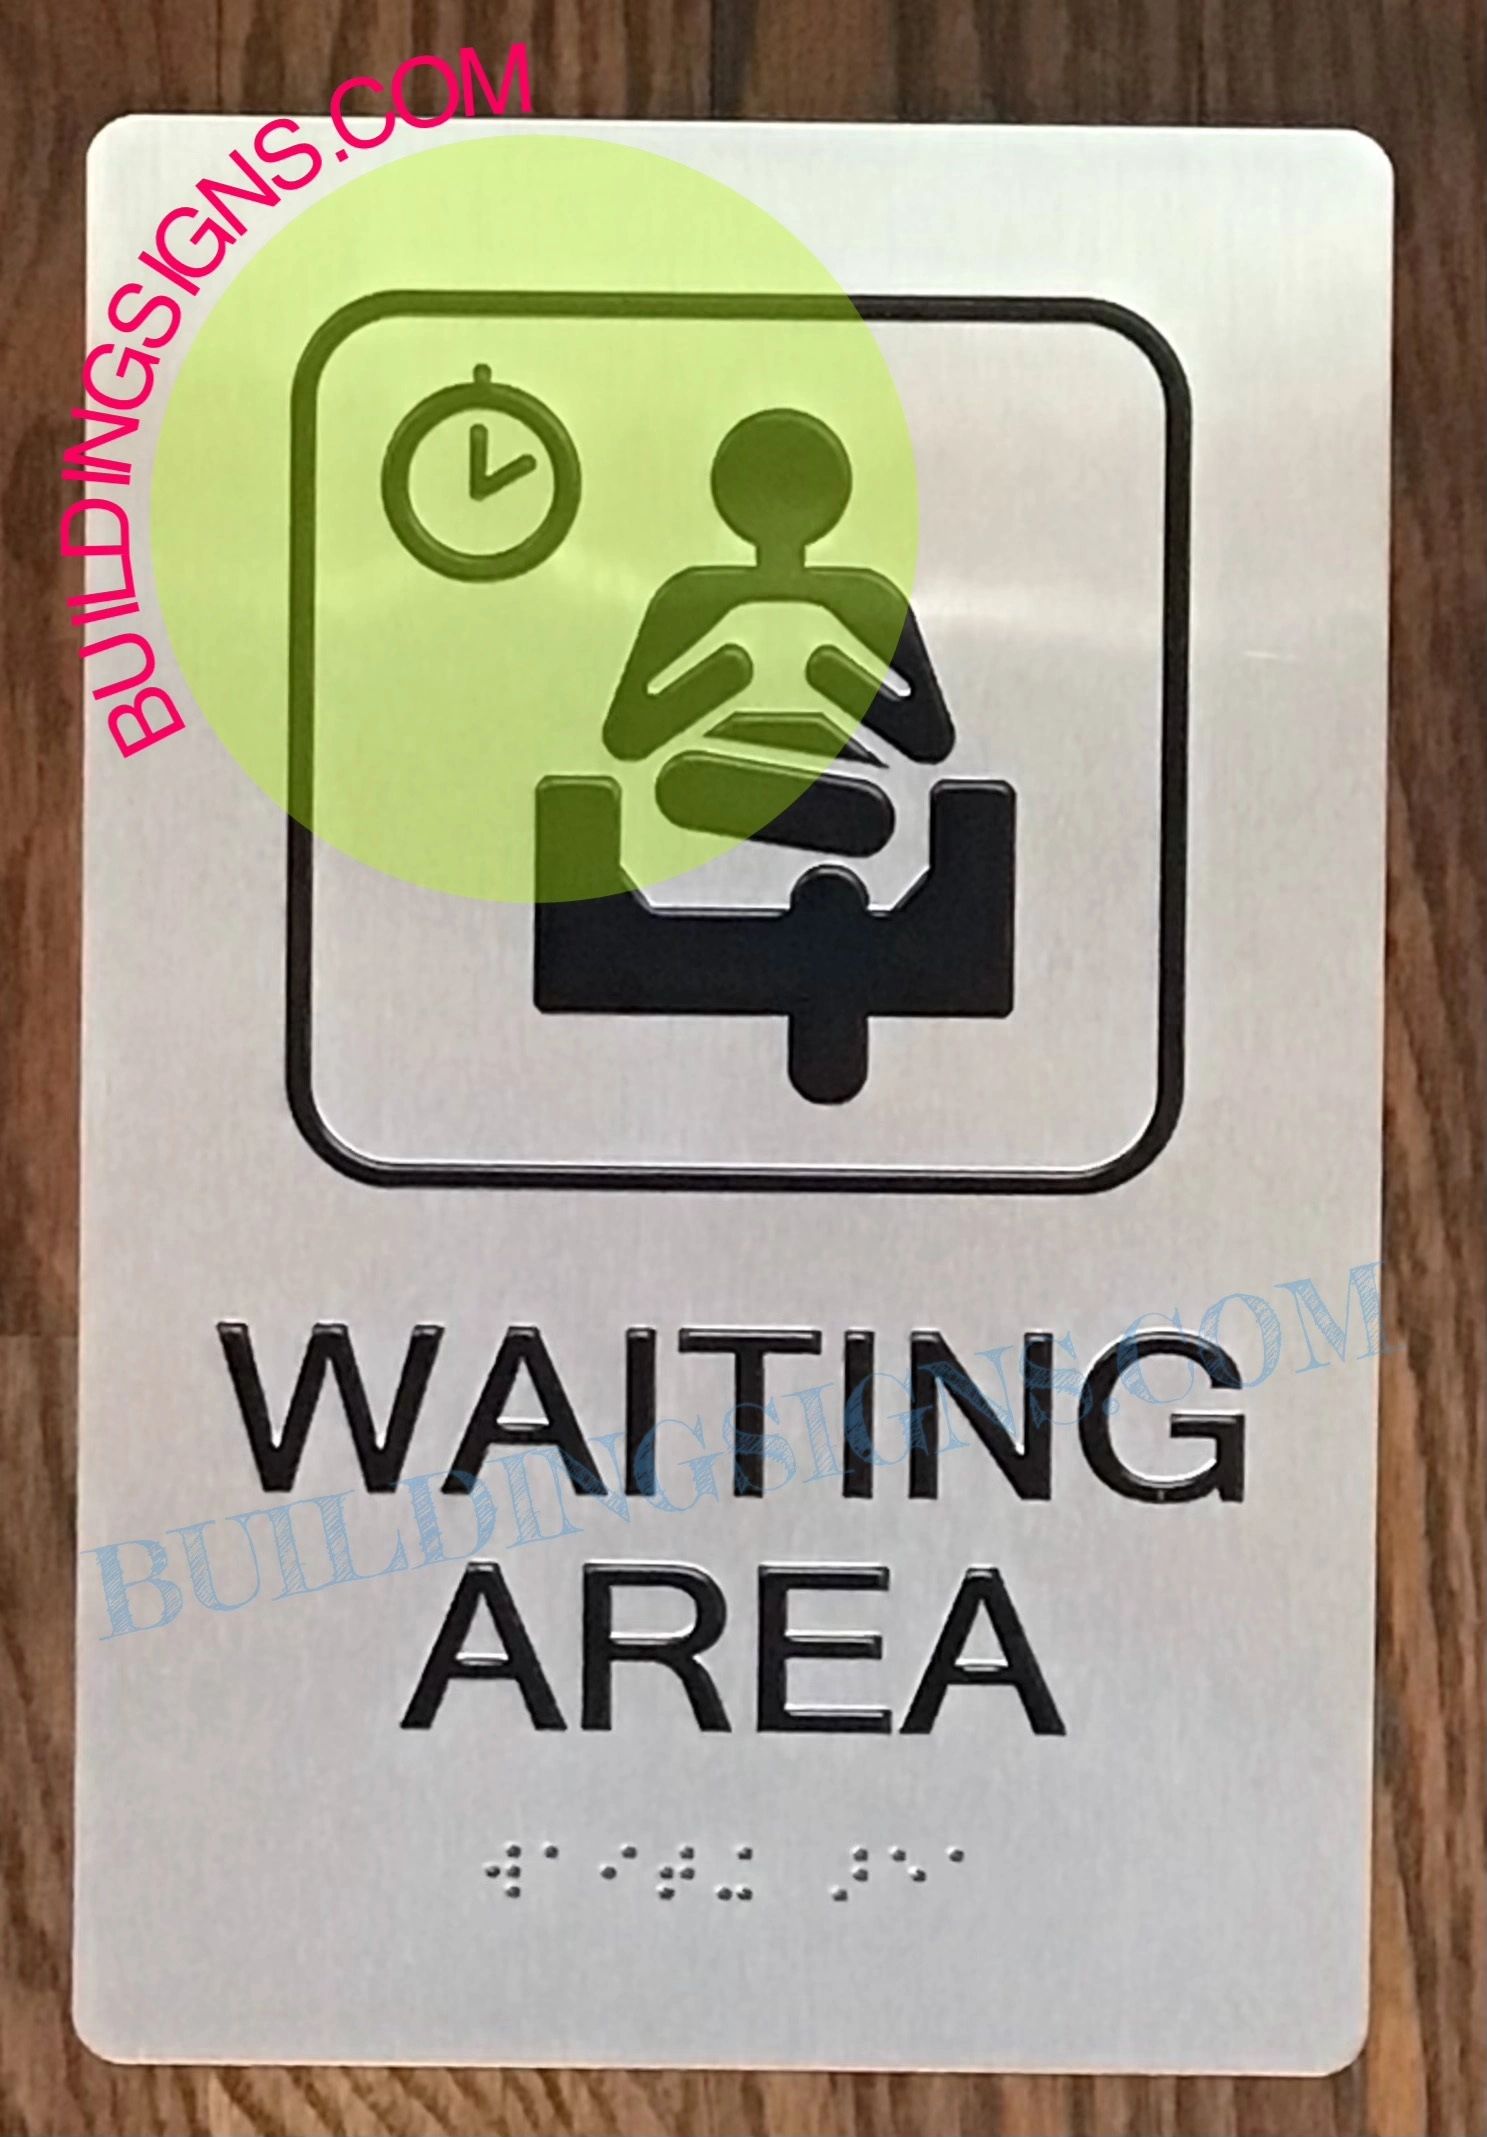 Waiting Area Sign Aluminum Signs 6x9 Hpd Signs The Official Store 